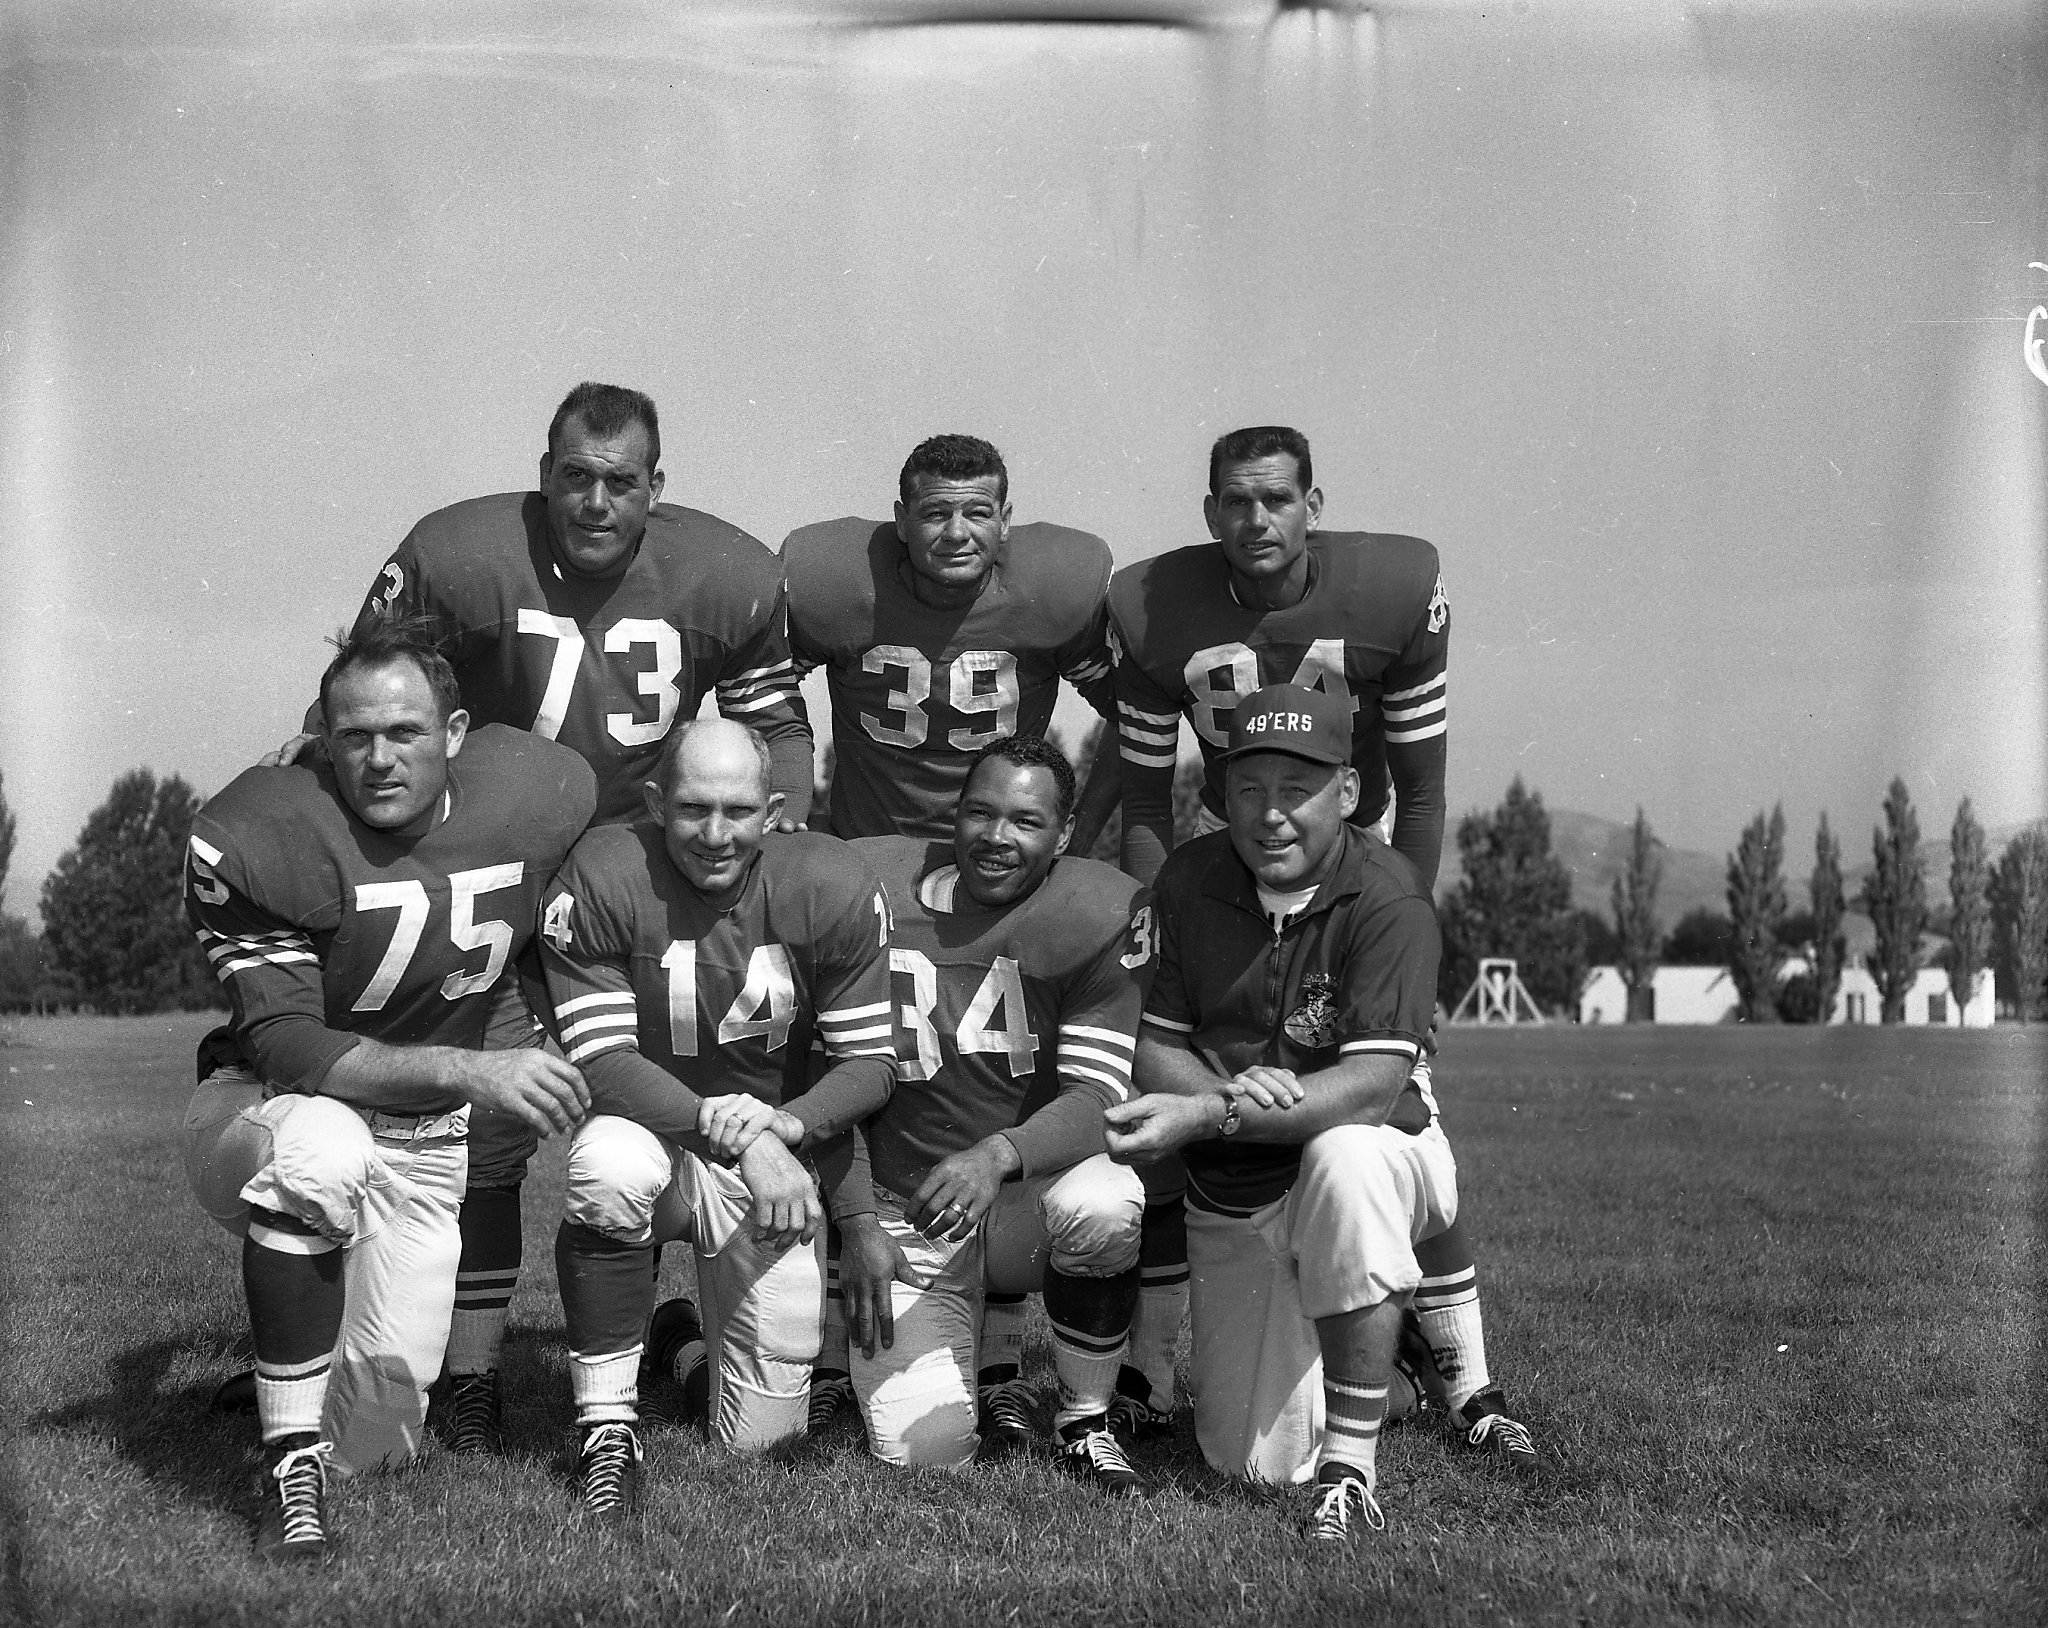 A look at 49ers training camp during the 1950s and 1960s - SFGate2048 x 1628